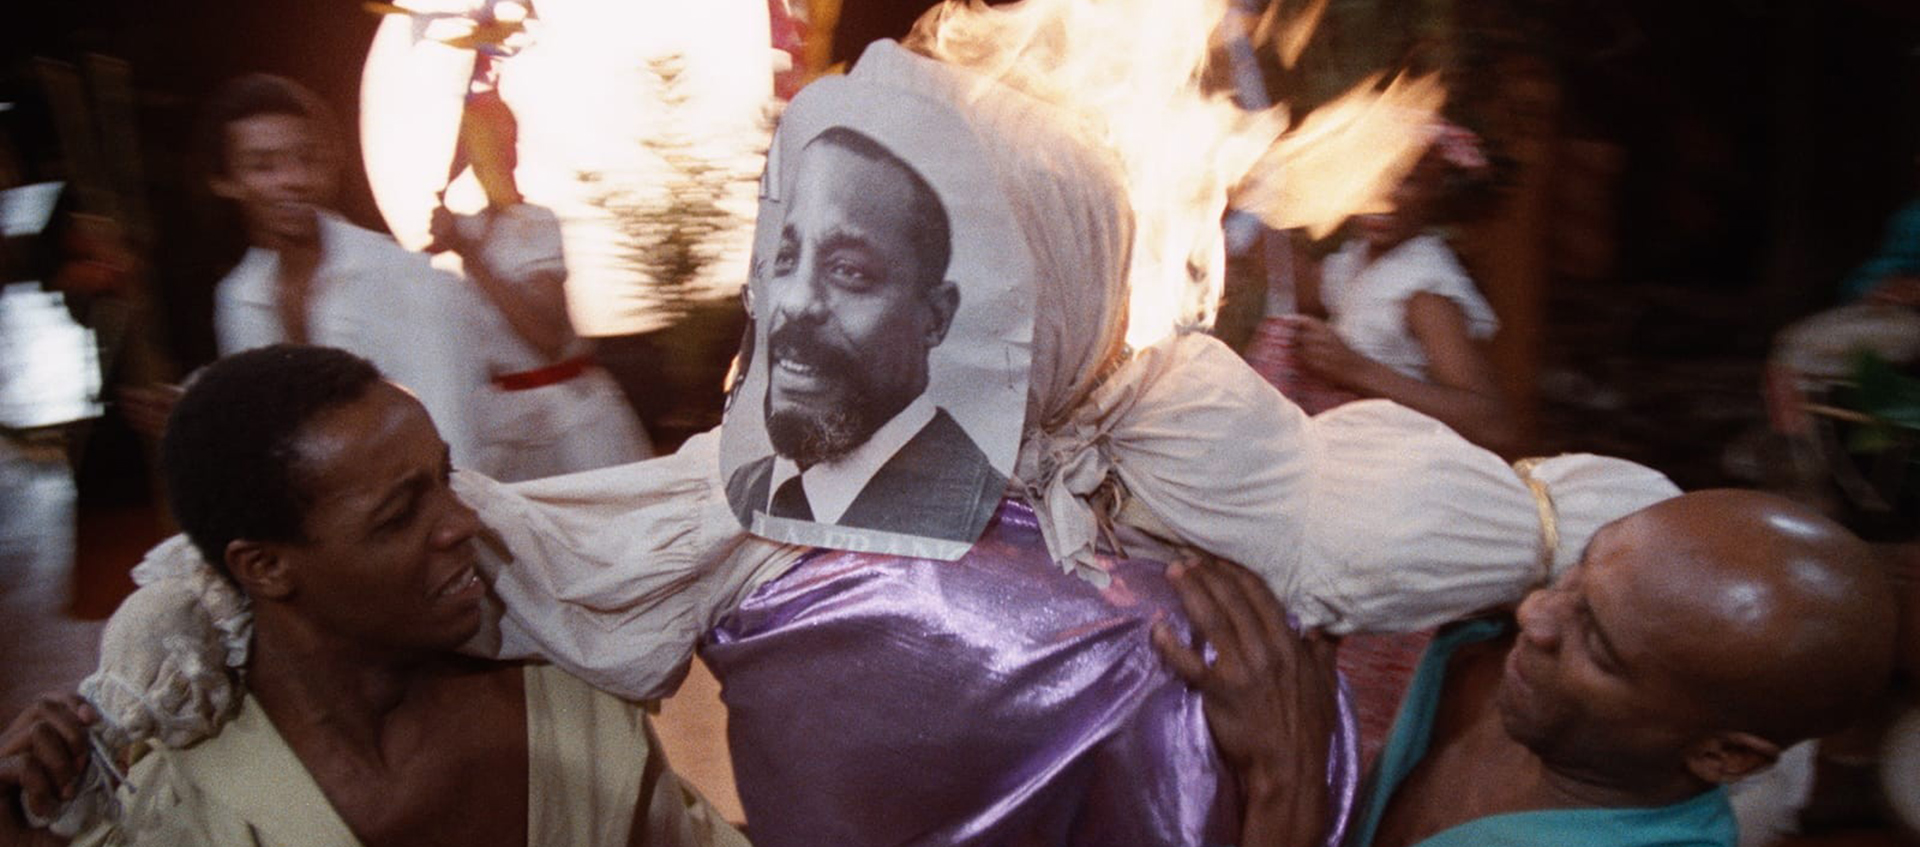 Two Black people hold up an effigy that is on fire, a photo of a Black man is attached to the face of the effigy.